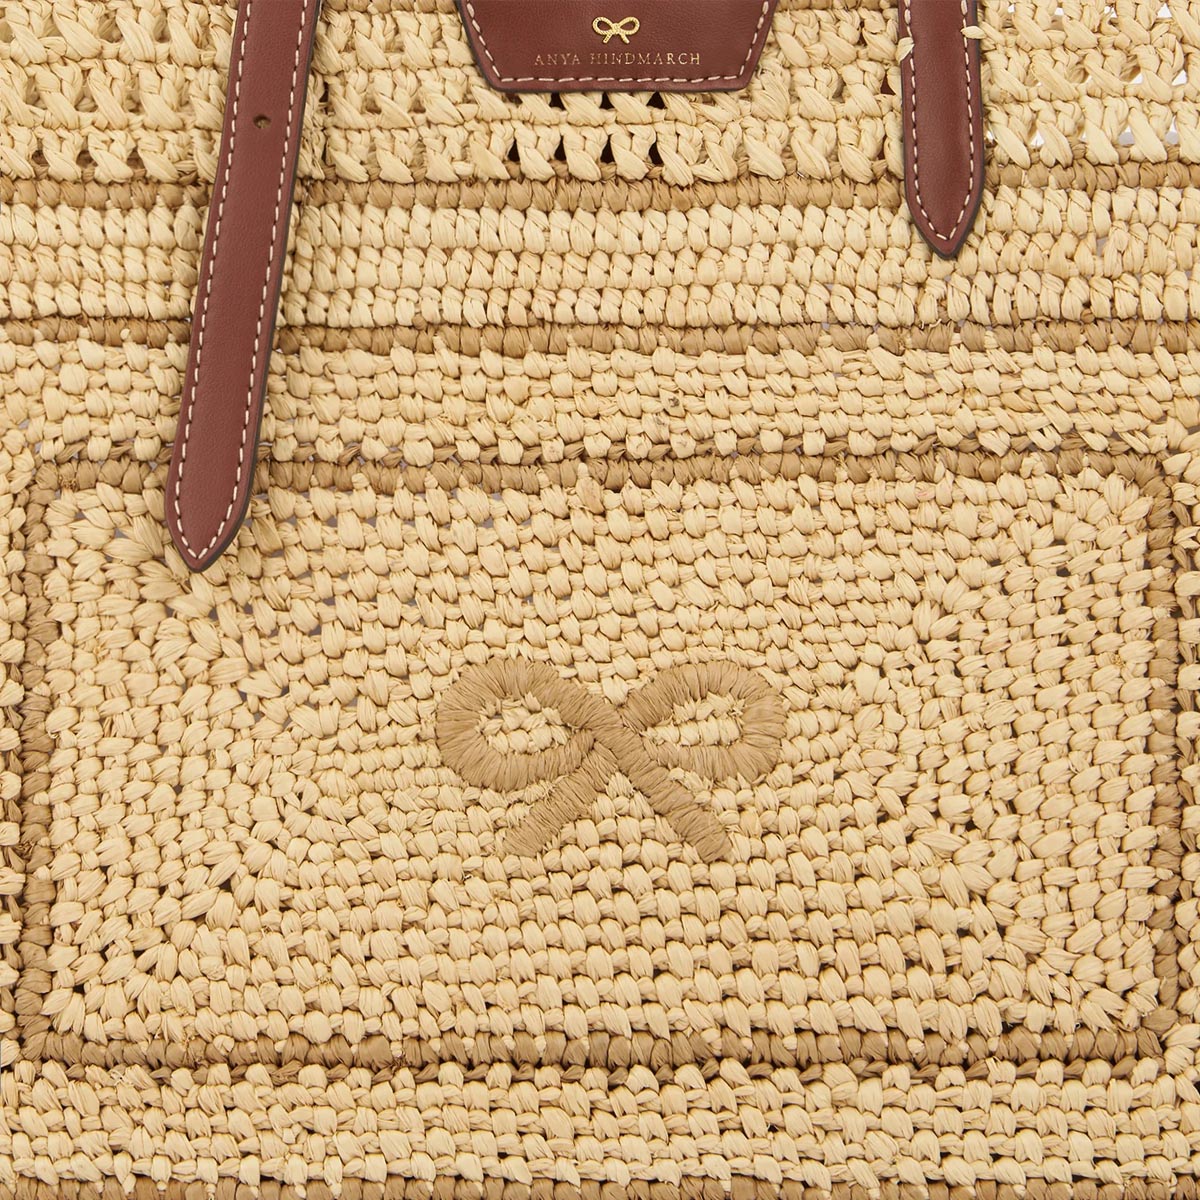 East West Bow Tote in Natural Raffia